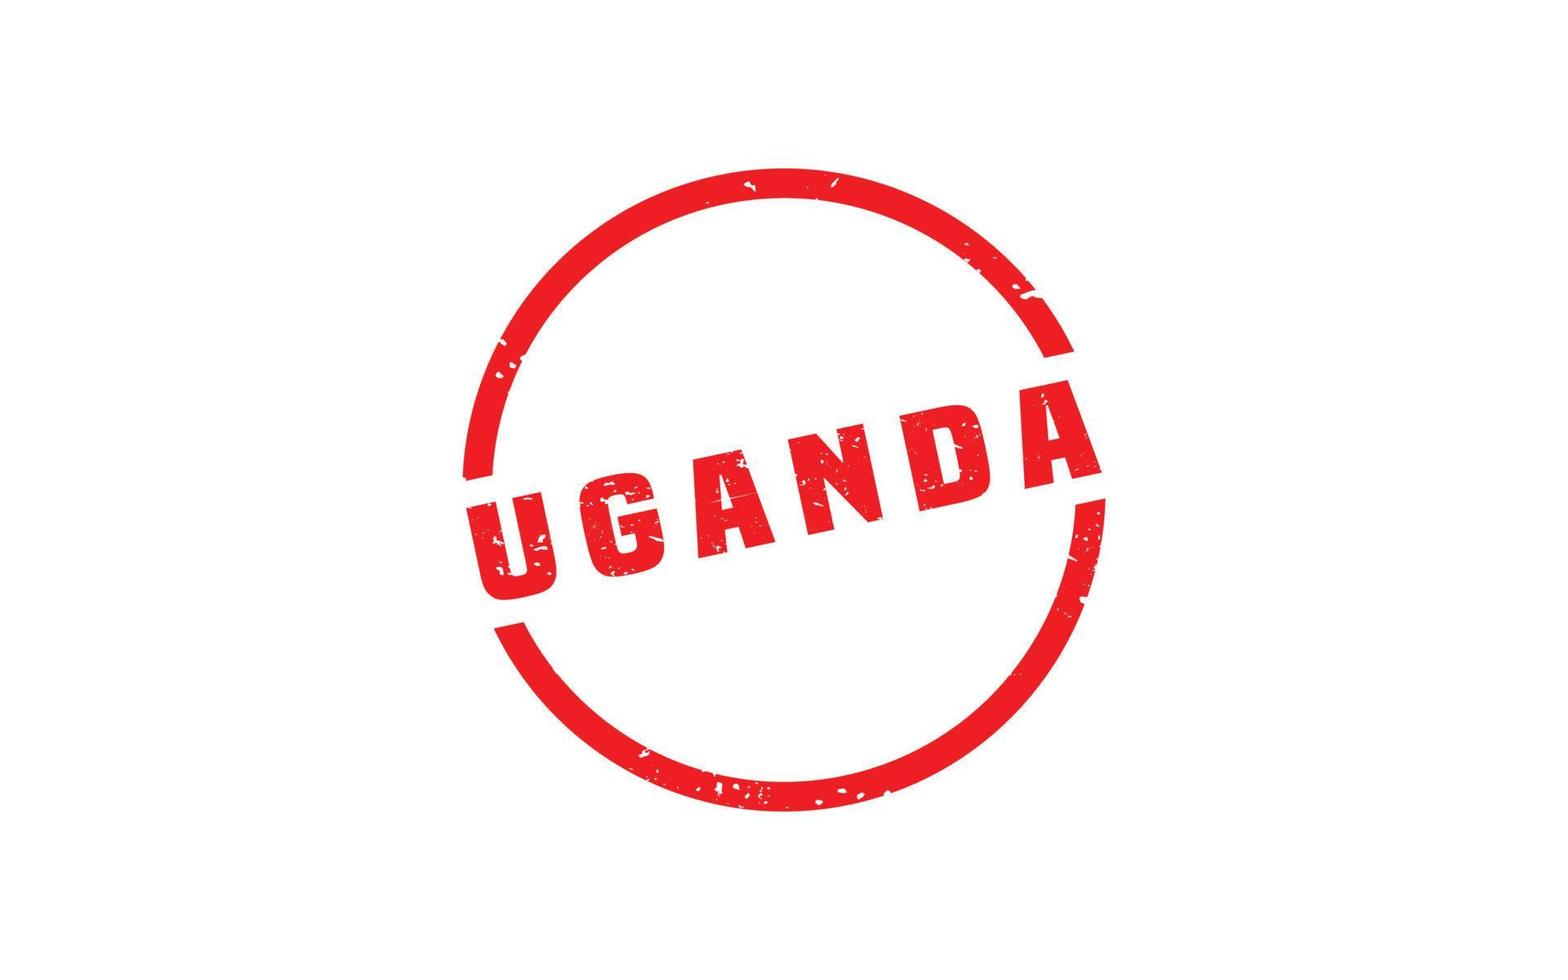 UGANDA stamp rubber with grunge style on white background vector